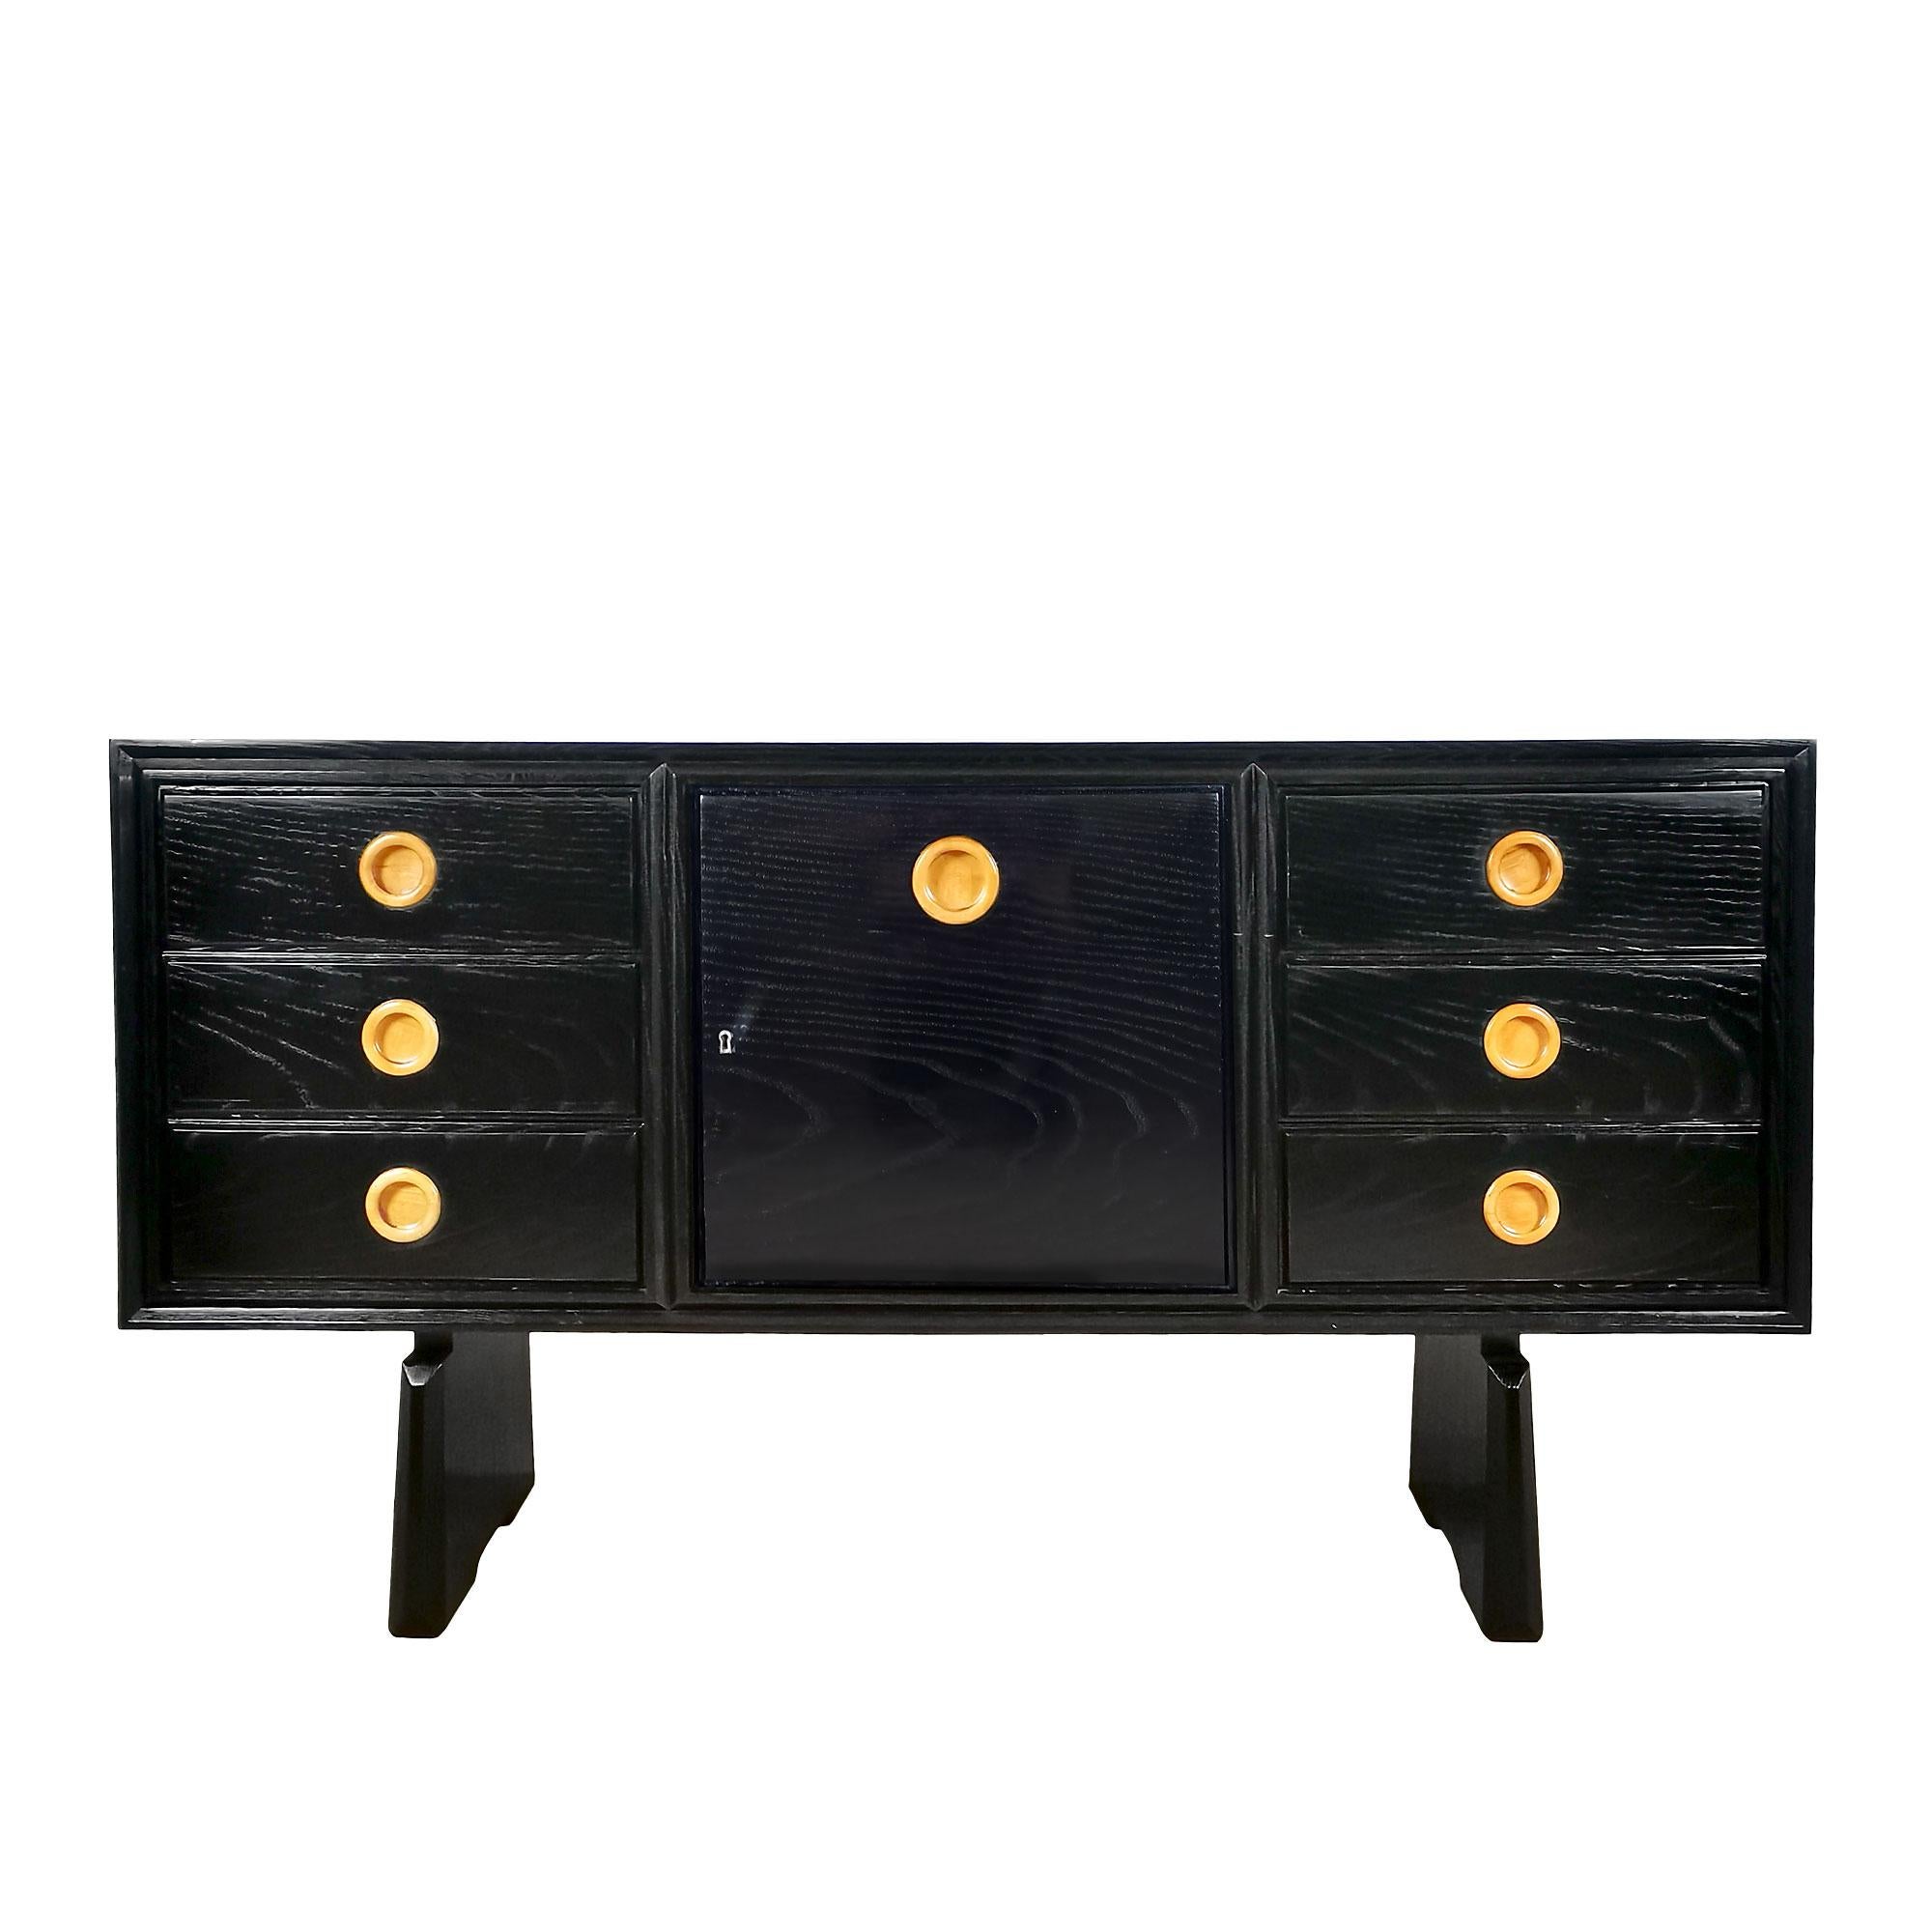 Small sideboard-bar cabinet, solid wood with open-pore treated oak veneered, dark chocolate stained and shellac finishing. Two sets of 3 drawers on either side of a door, opening onto the bar covered with micro-mirrors. 
Attributed to Paolo Buffa.